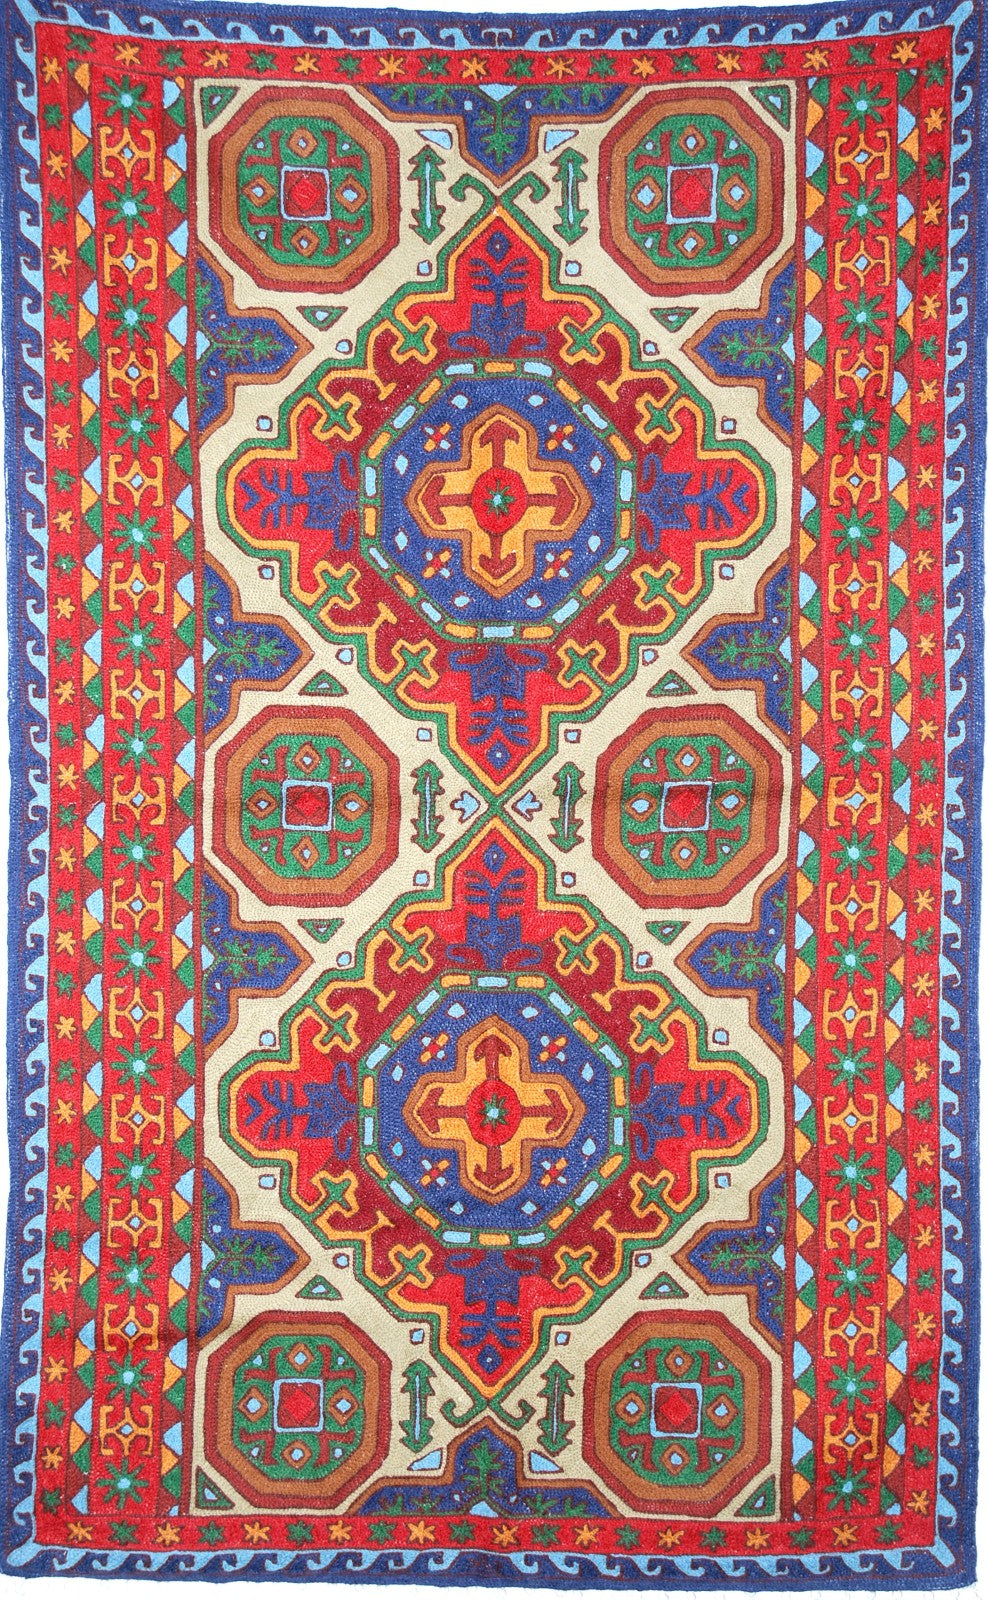 ChainStitch Tapestry Silk Area Rug, Multicolor Embroidery 2.5x4 feet # -  Best of Kashmir